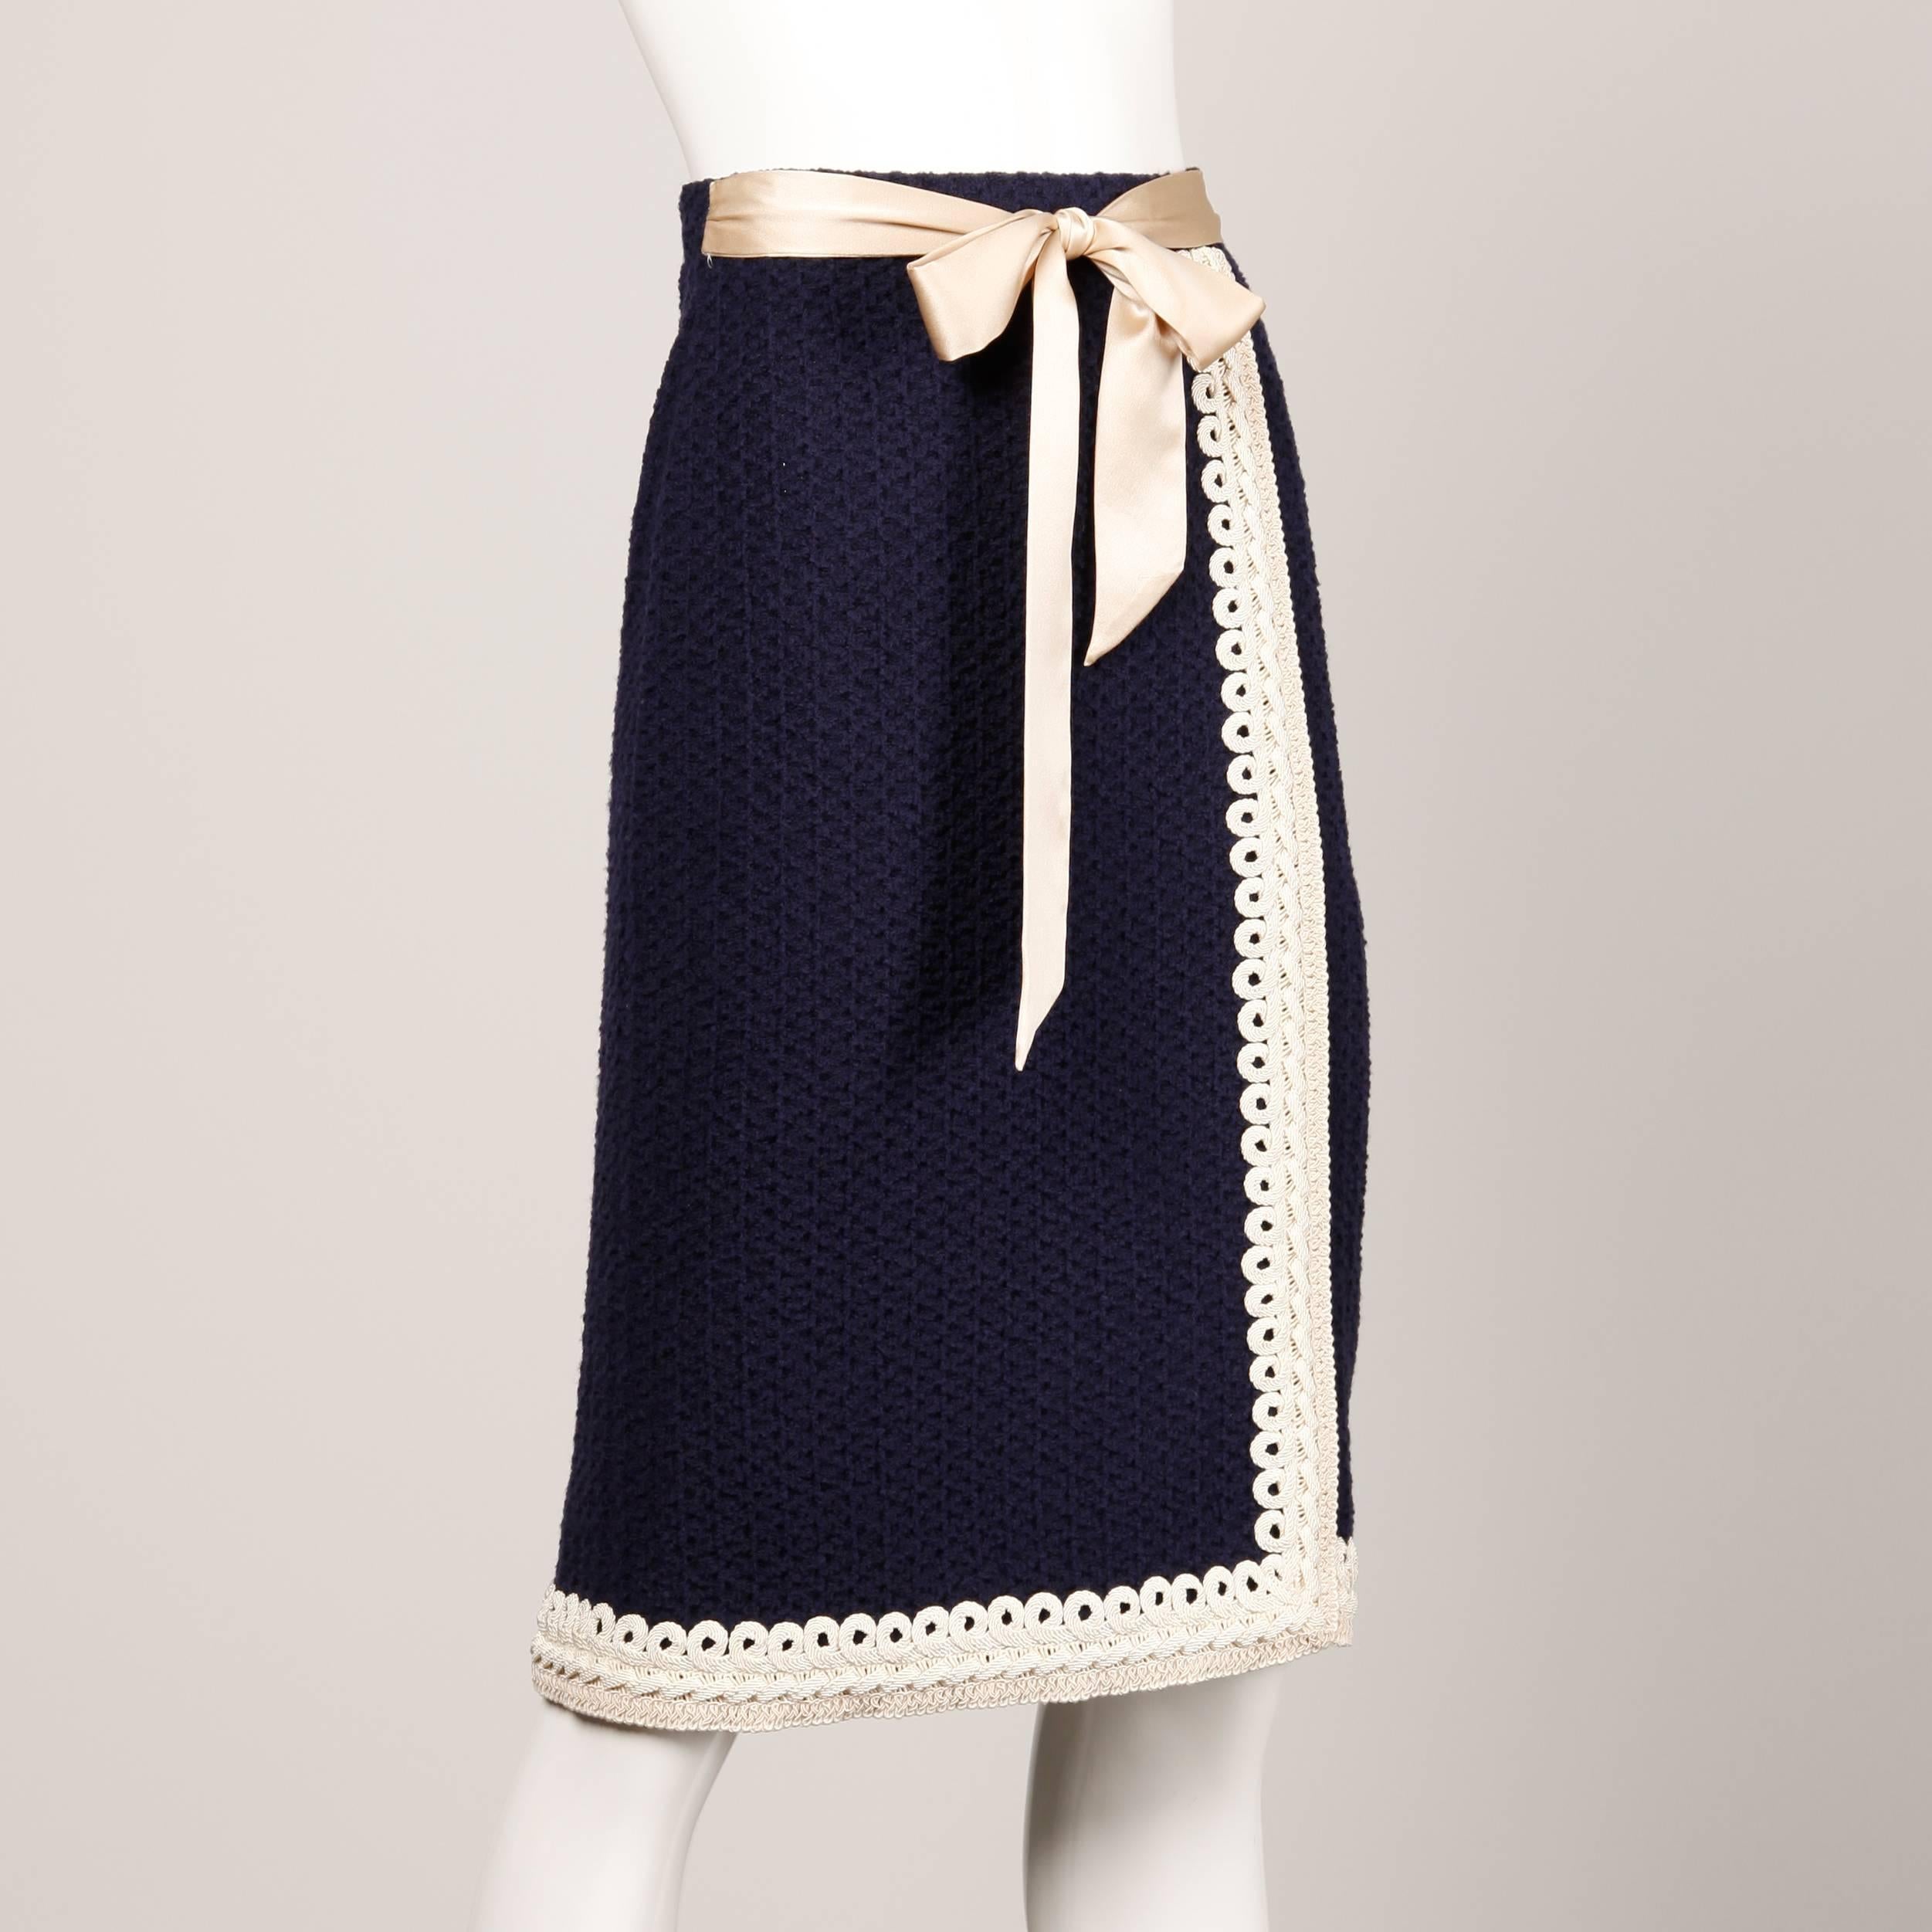 Stunning vintage navy blue wool knit skirt with ivory cord trim by Adolfo. Front silk satin bow detail. Elastic waistband. Fabric has some stretch. There is no marked size but the skirt will fit a modern US XS-S (Size 6 max). The waist measures